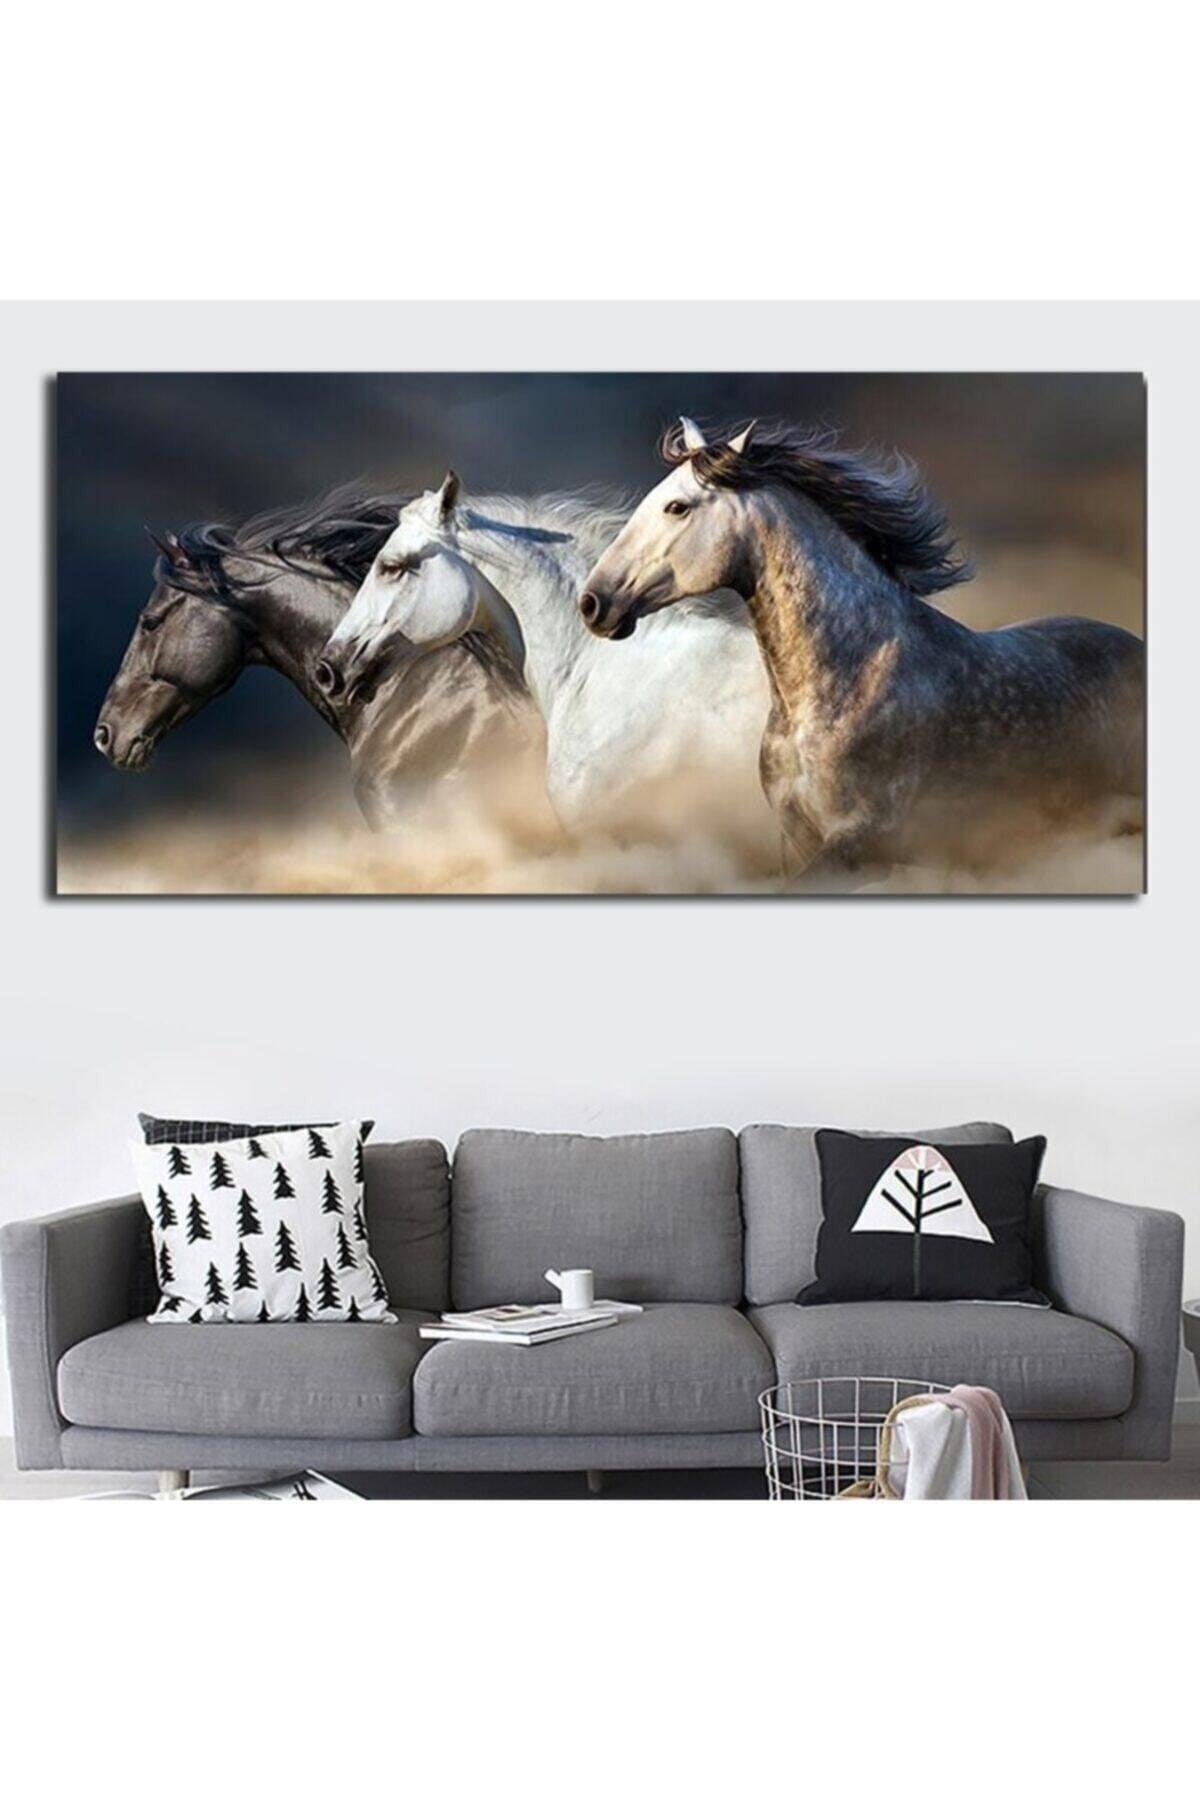 Horse Painting Decoration Canvas Painting - Swordslife